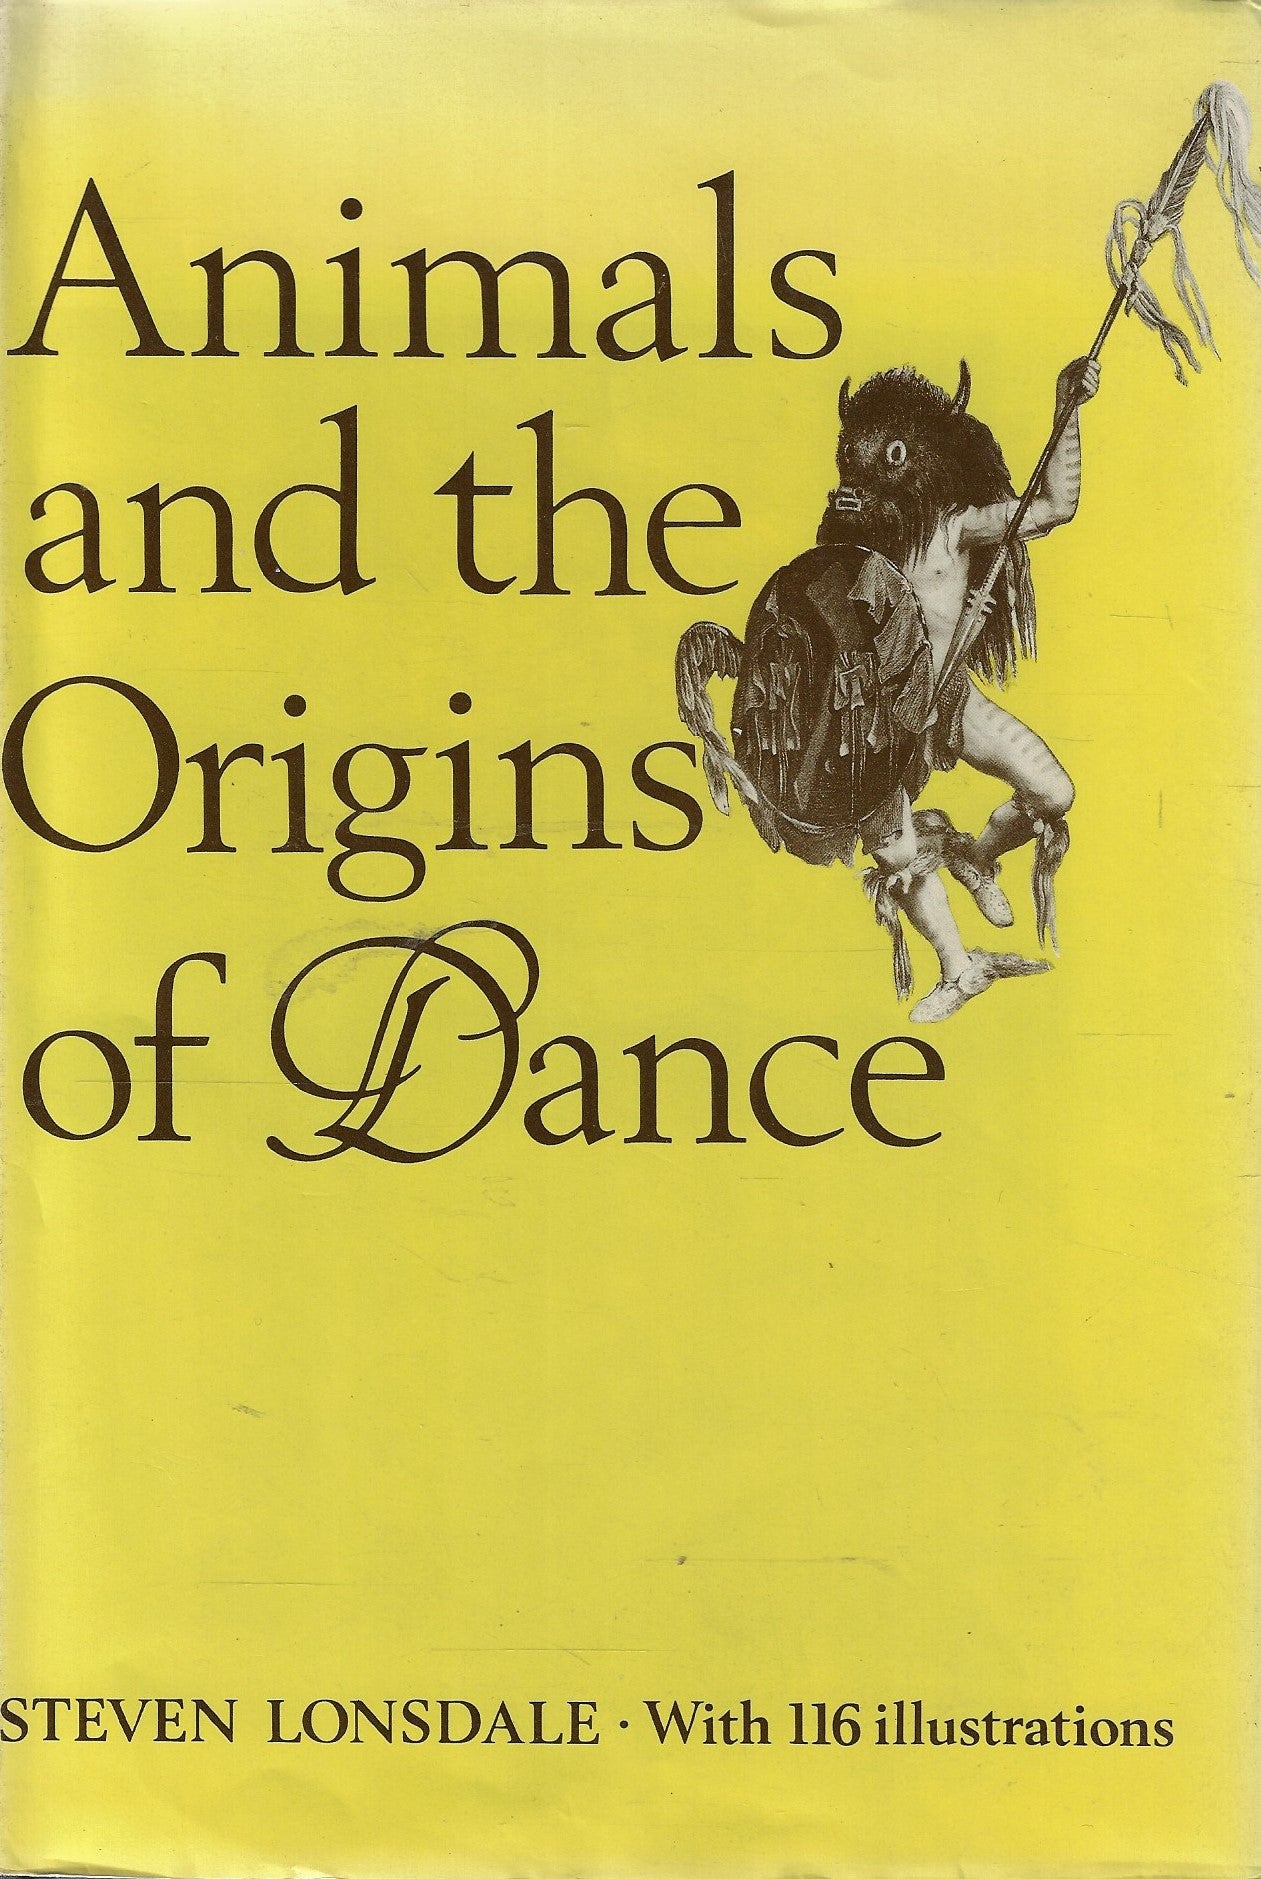 Animals and the origins of dance